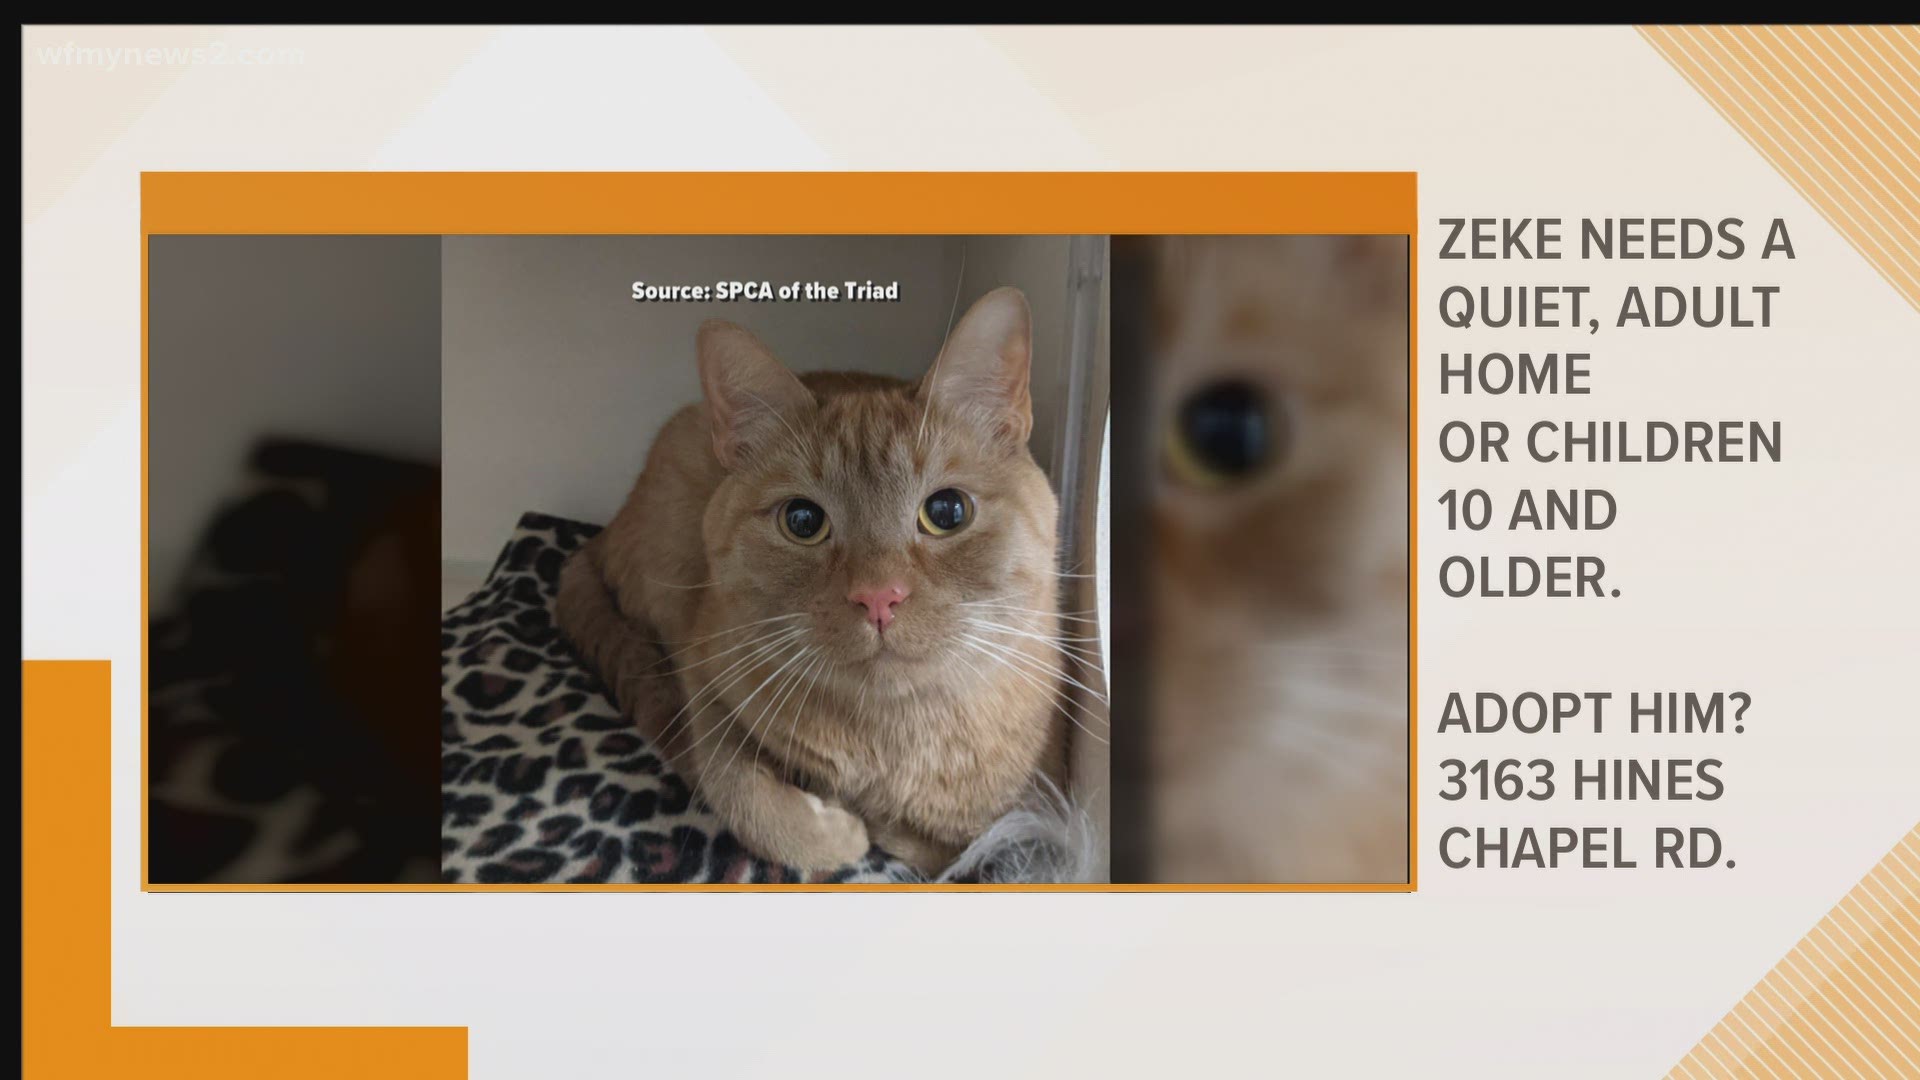 He's a friendly cat, let's get Zeke adopted!